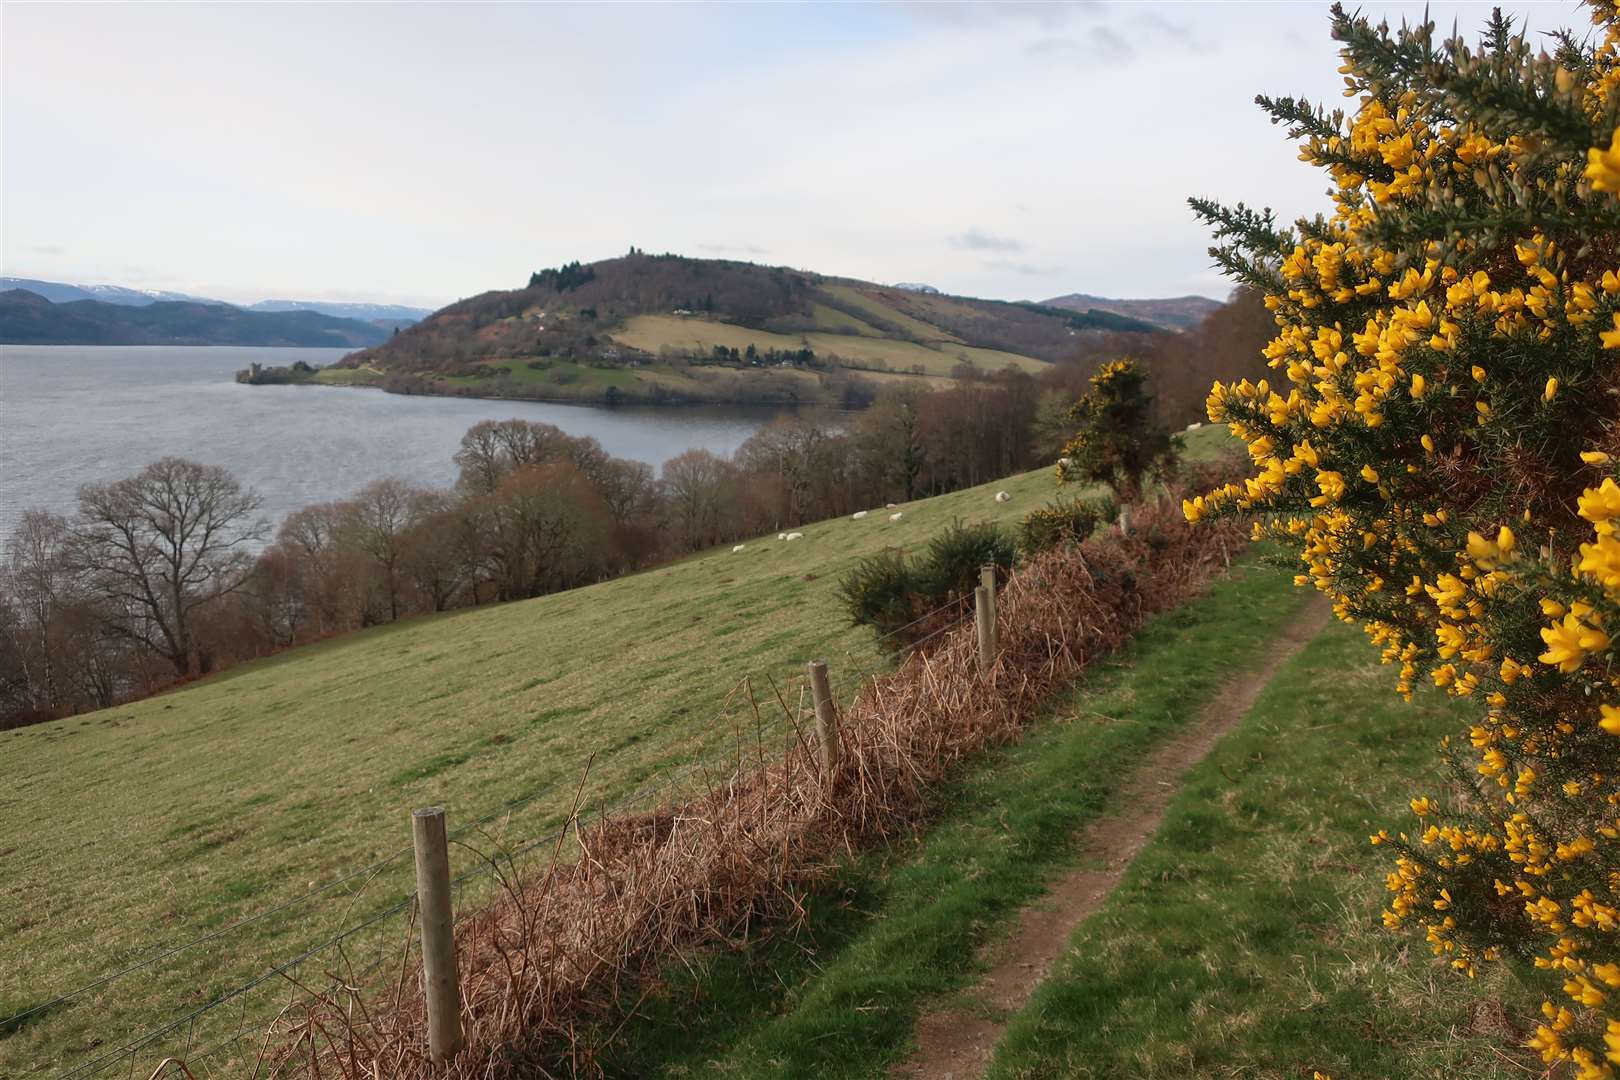 The narrow path as you turn towards the village with Urquhart Castle visible across the bay.